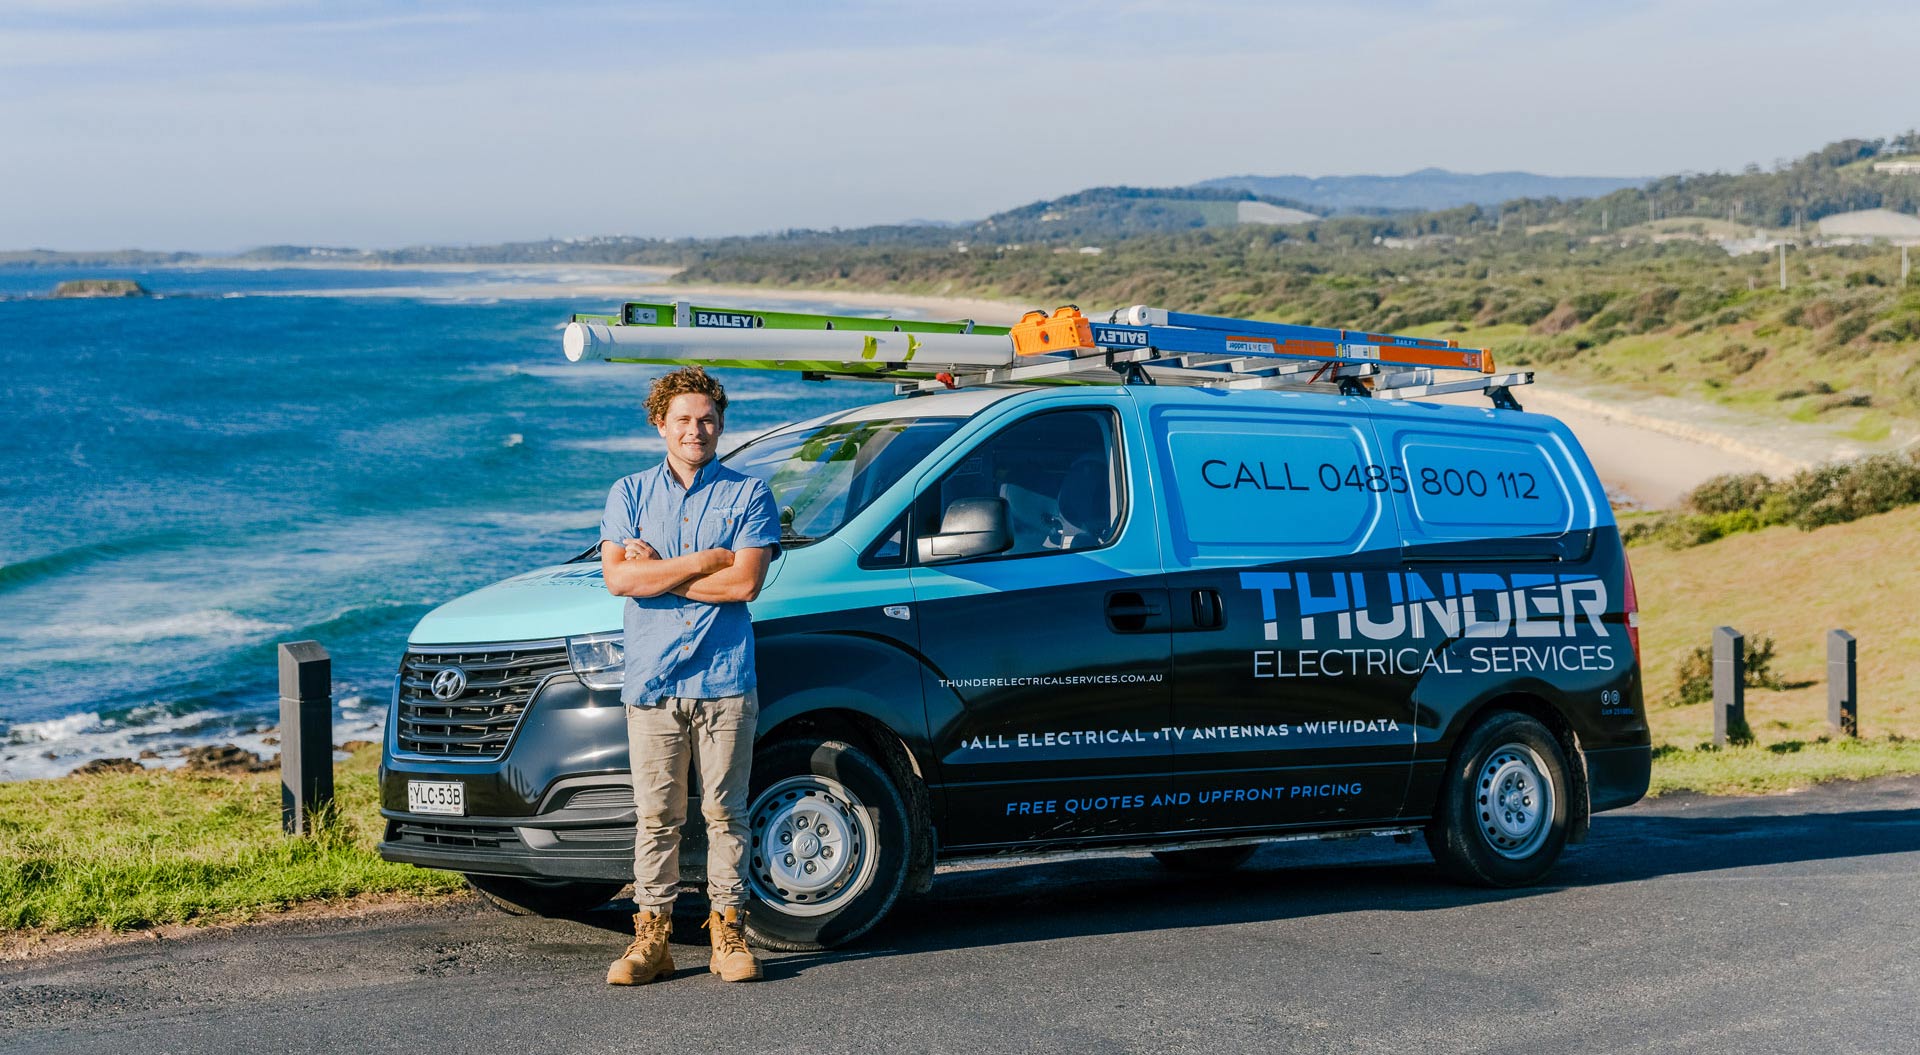 Thunder Electrical Services